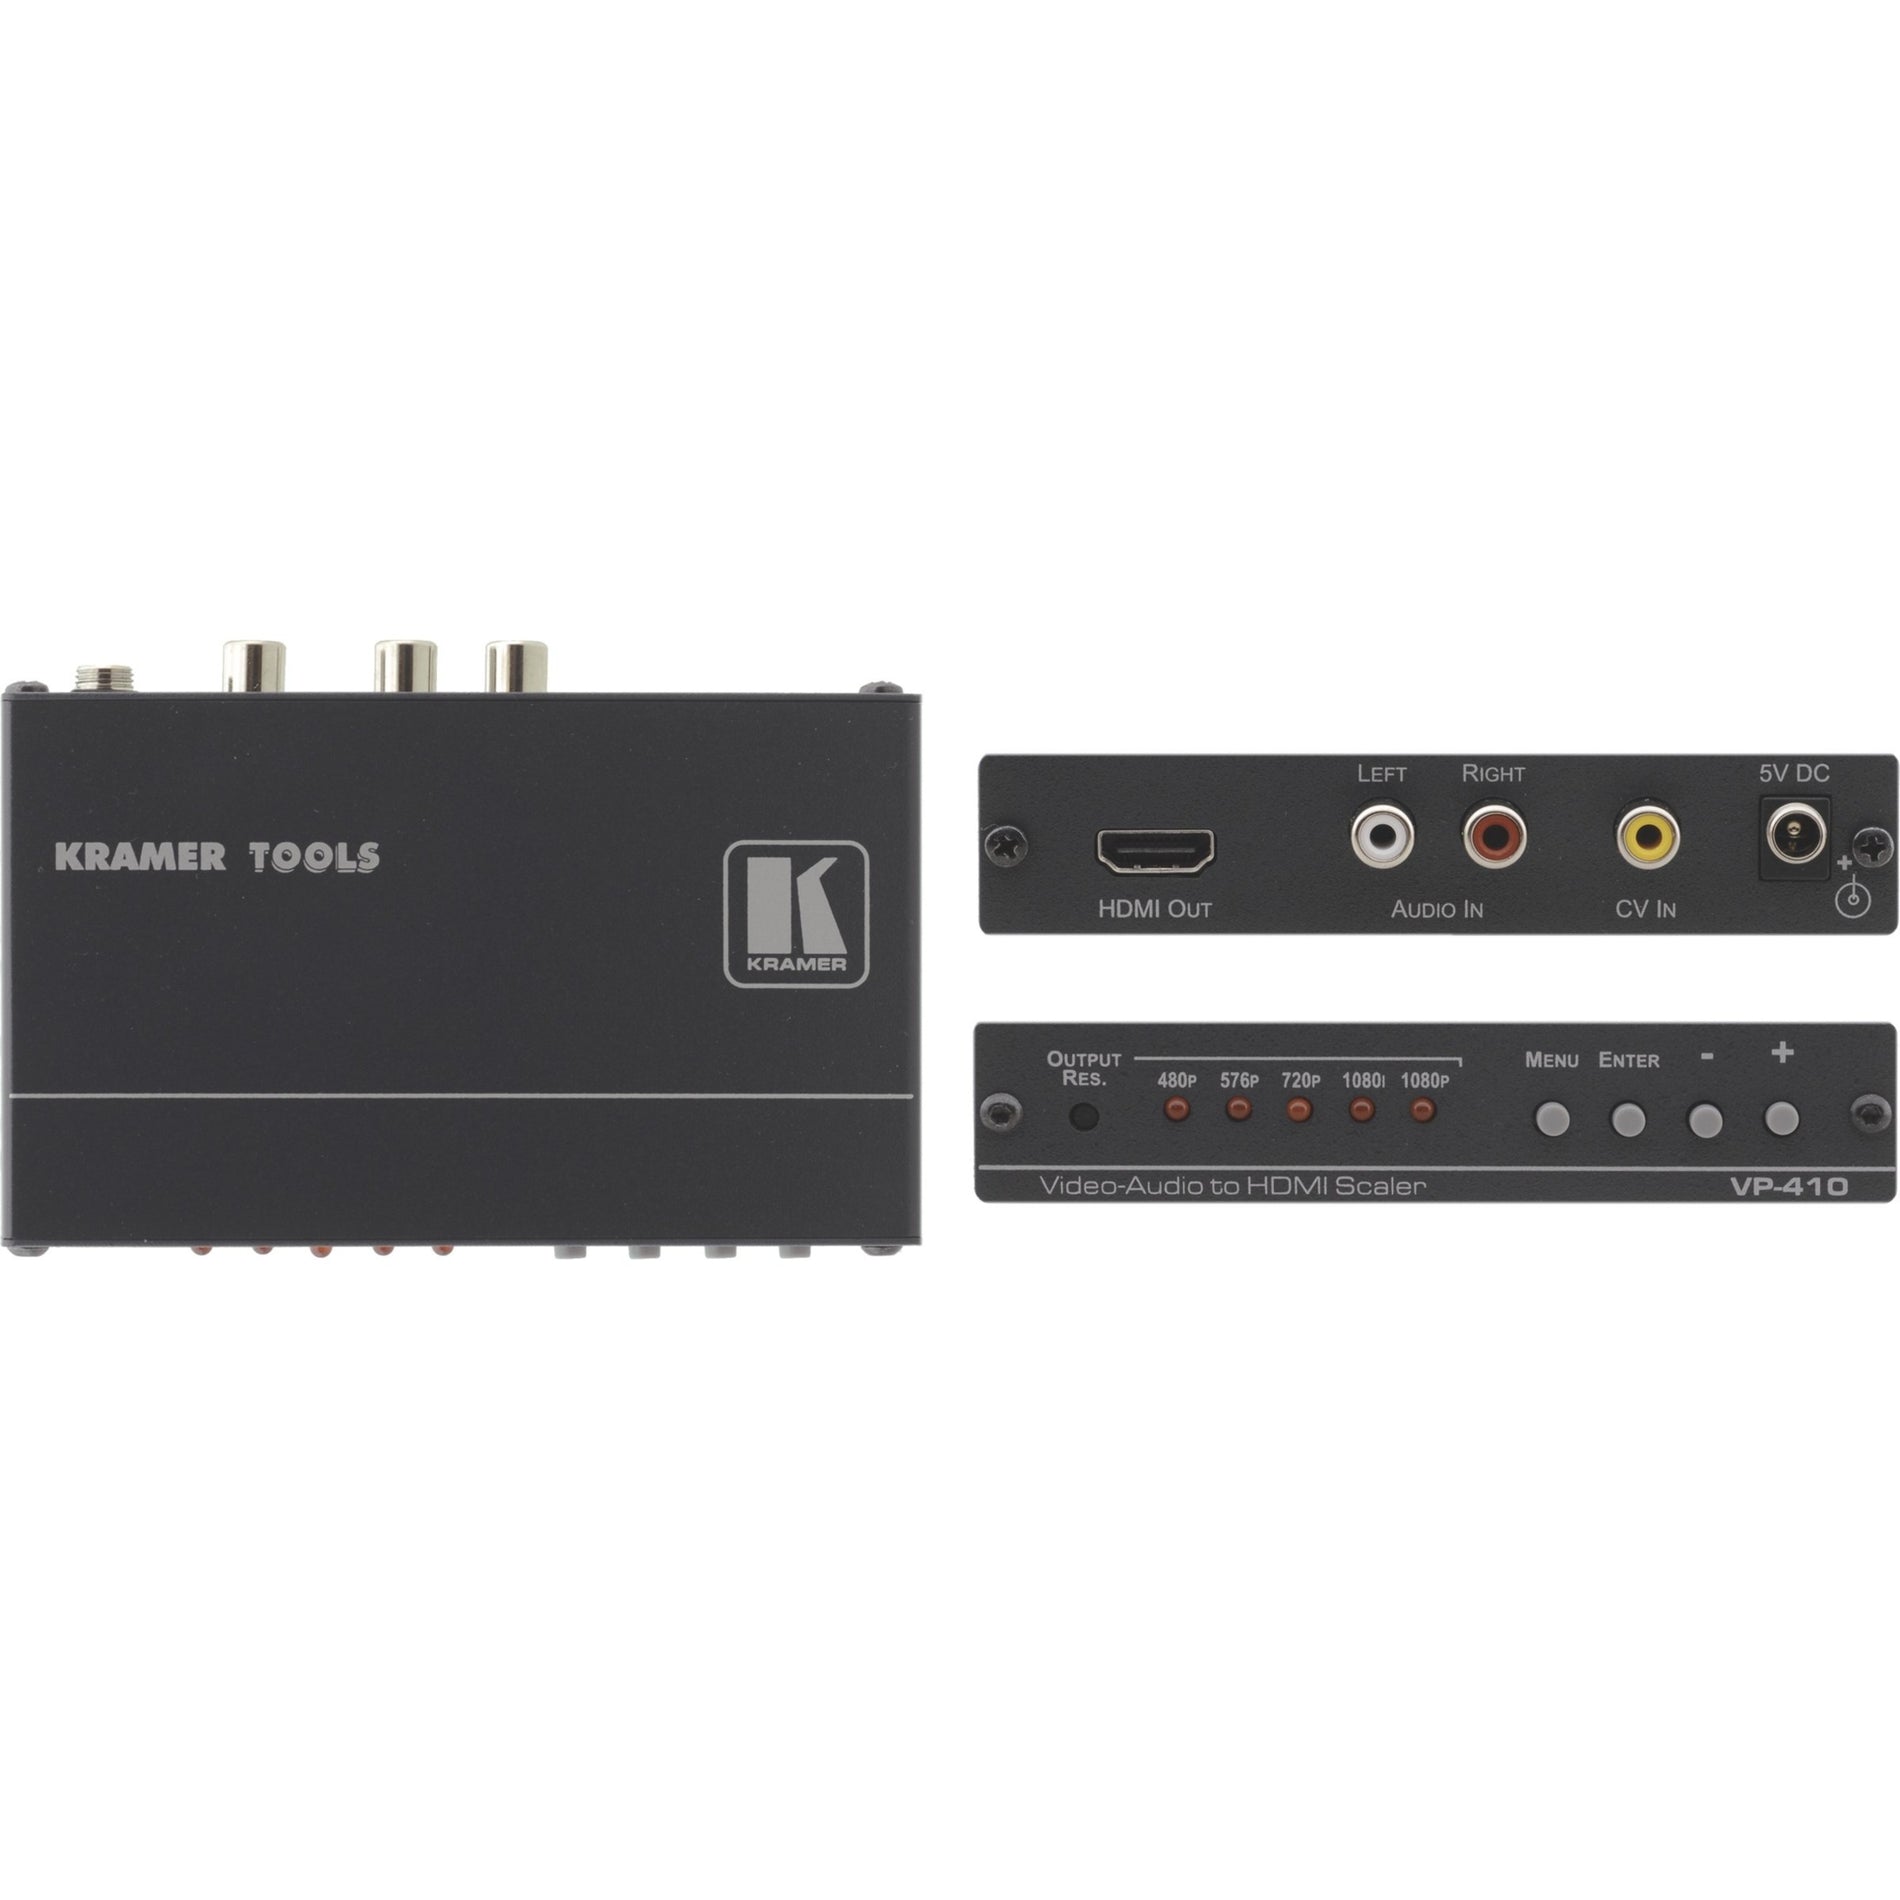 Kramer 90-041090 Composite Video & Stereo Audio to HDMI Scaler, Video Scaling, Signal Conversion, 1920 x 1080